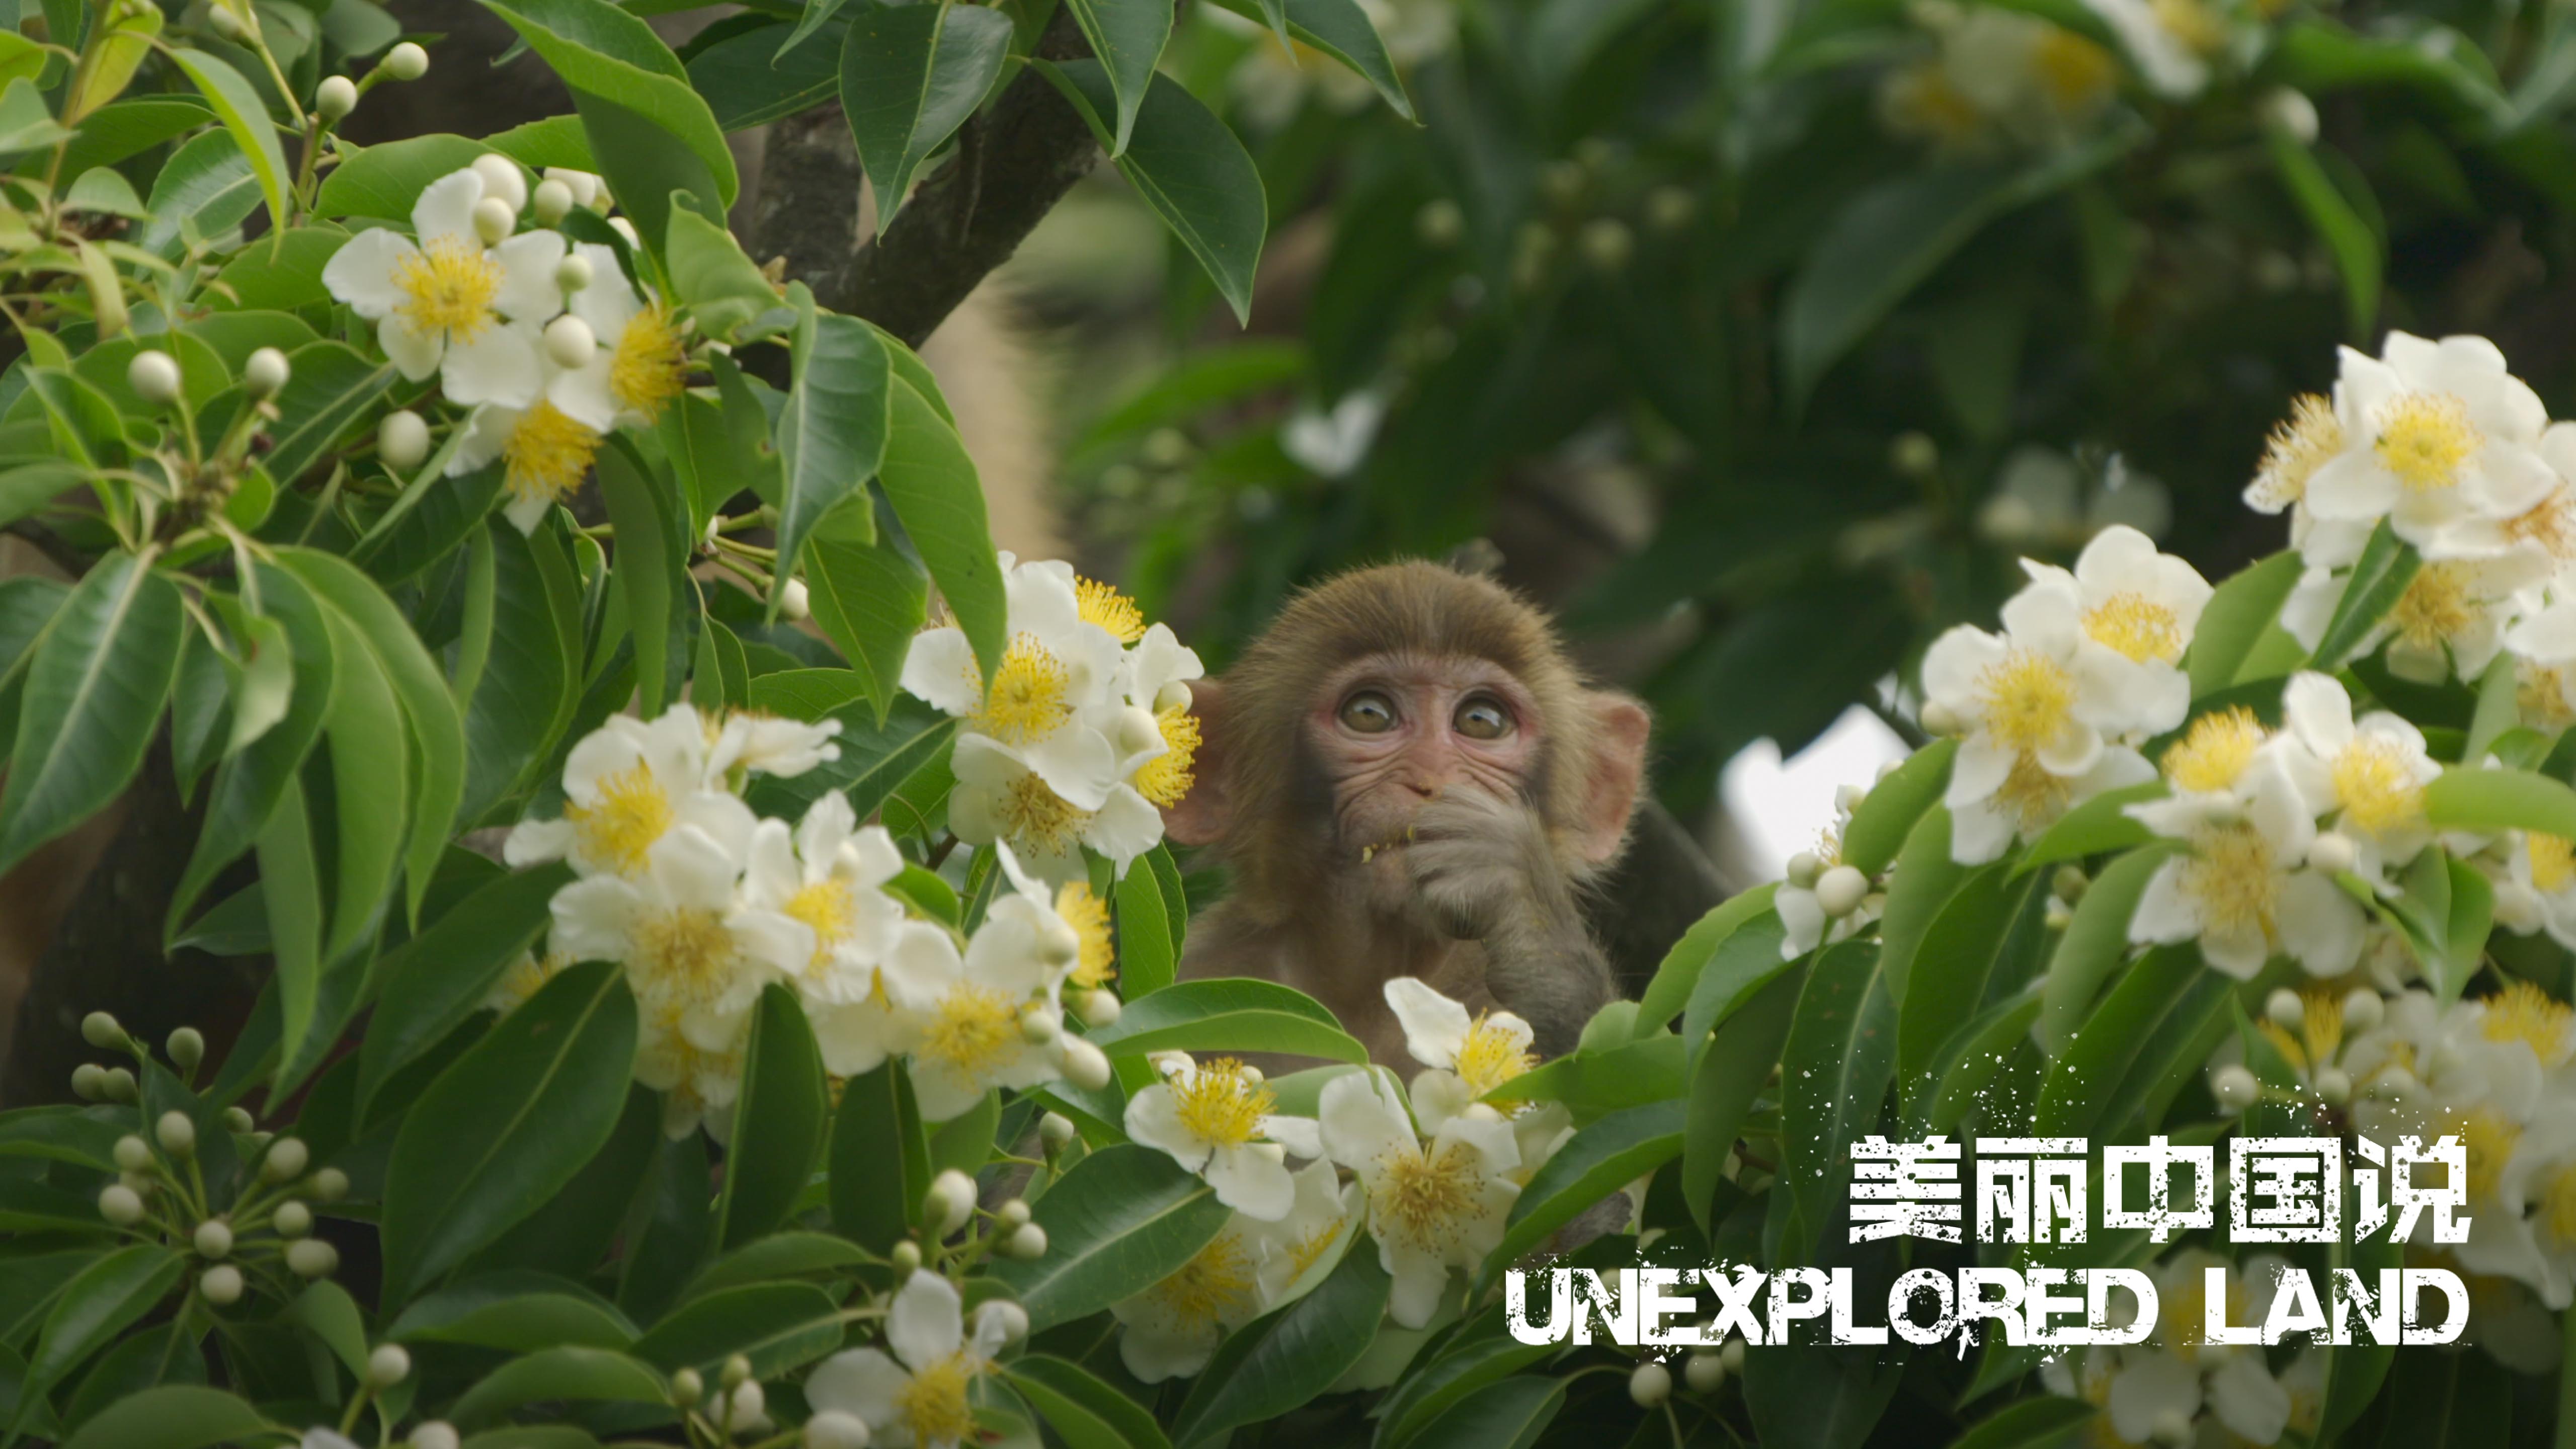 Unexplored Land: Stories of nature in a bustling city